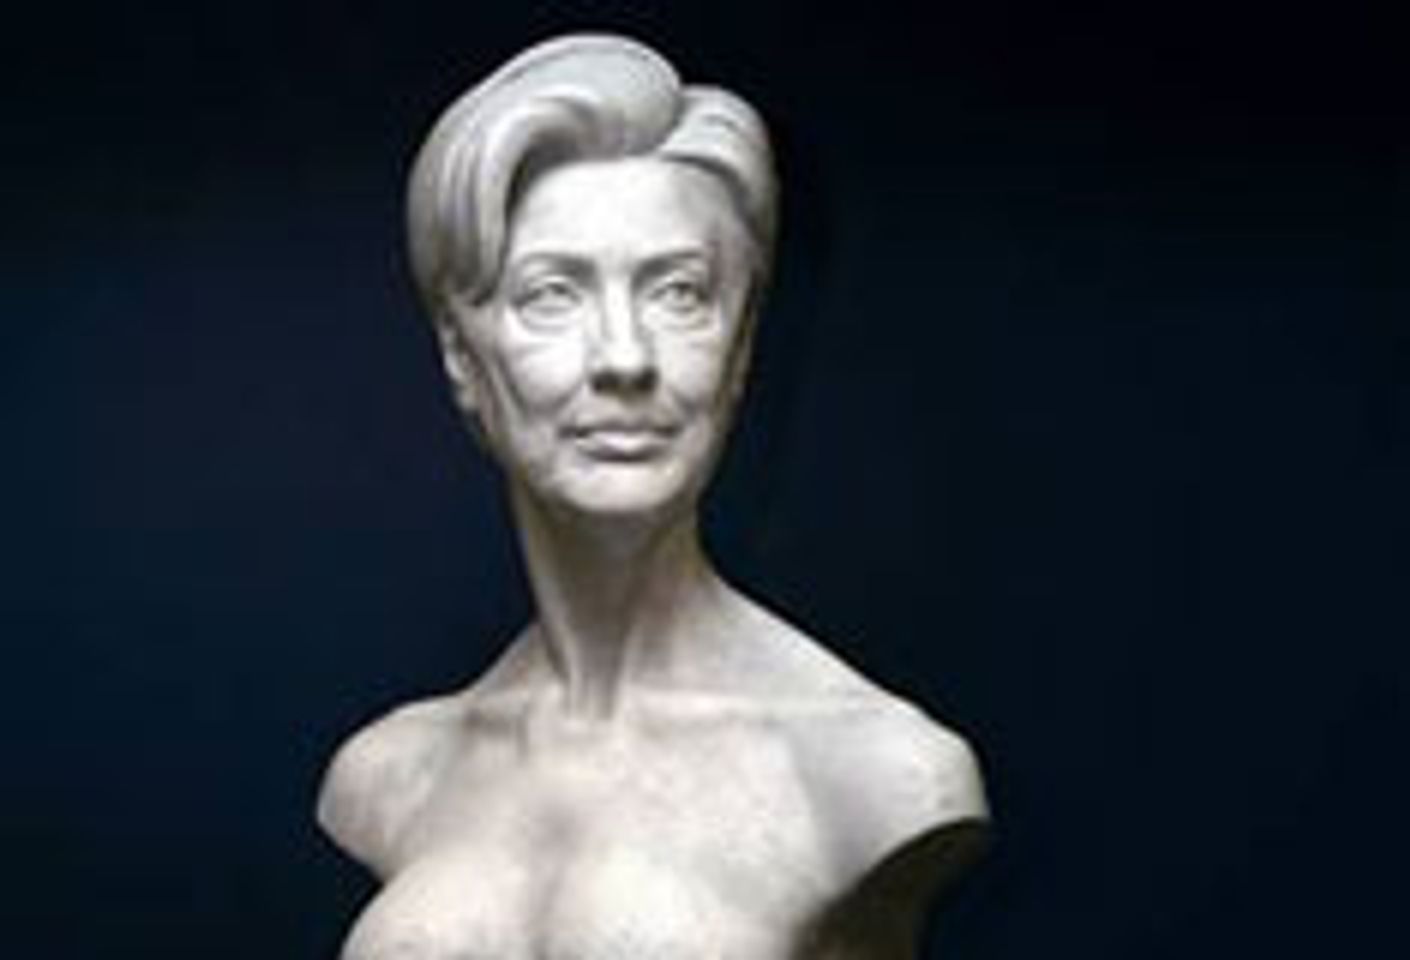 Hillary Clinton Bust Goes on Display at Museum of Sex